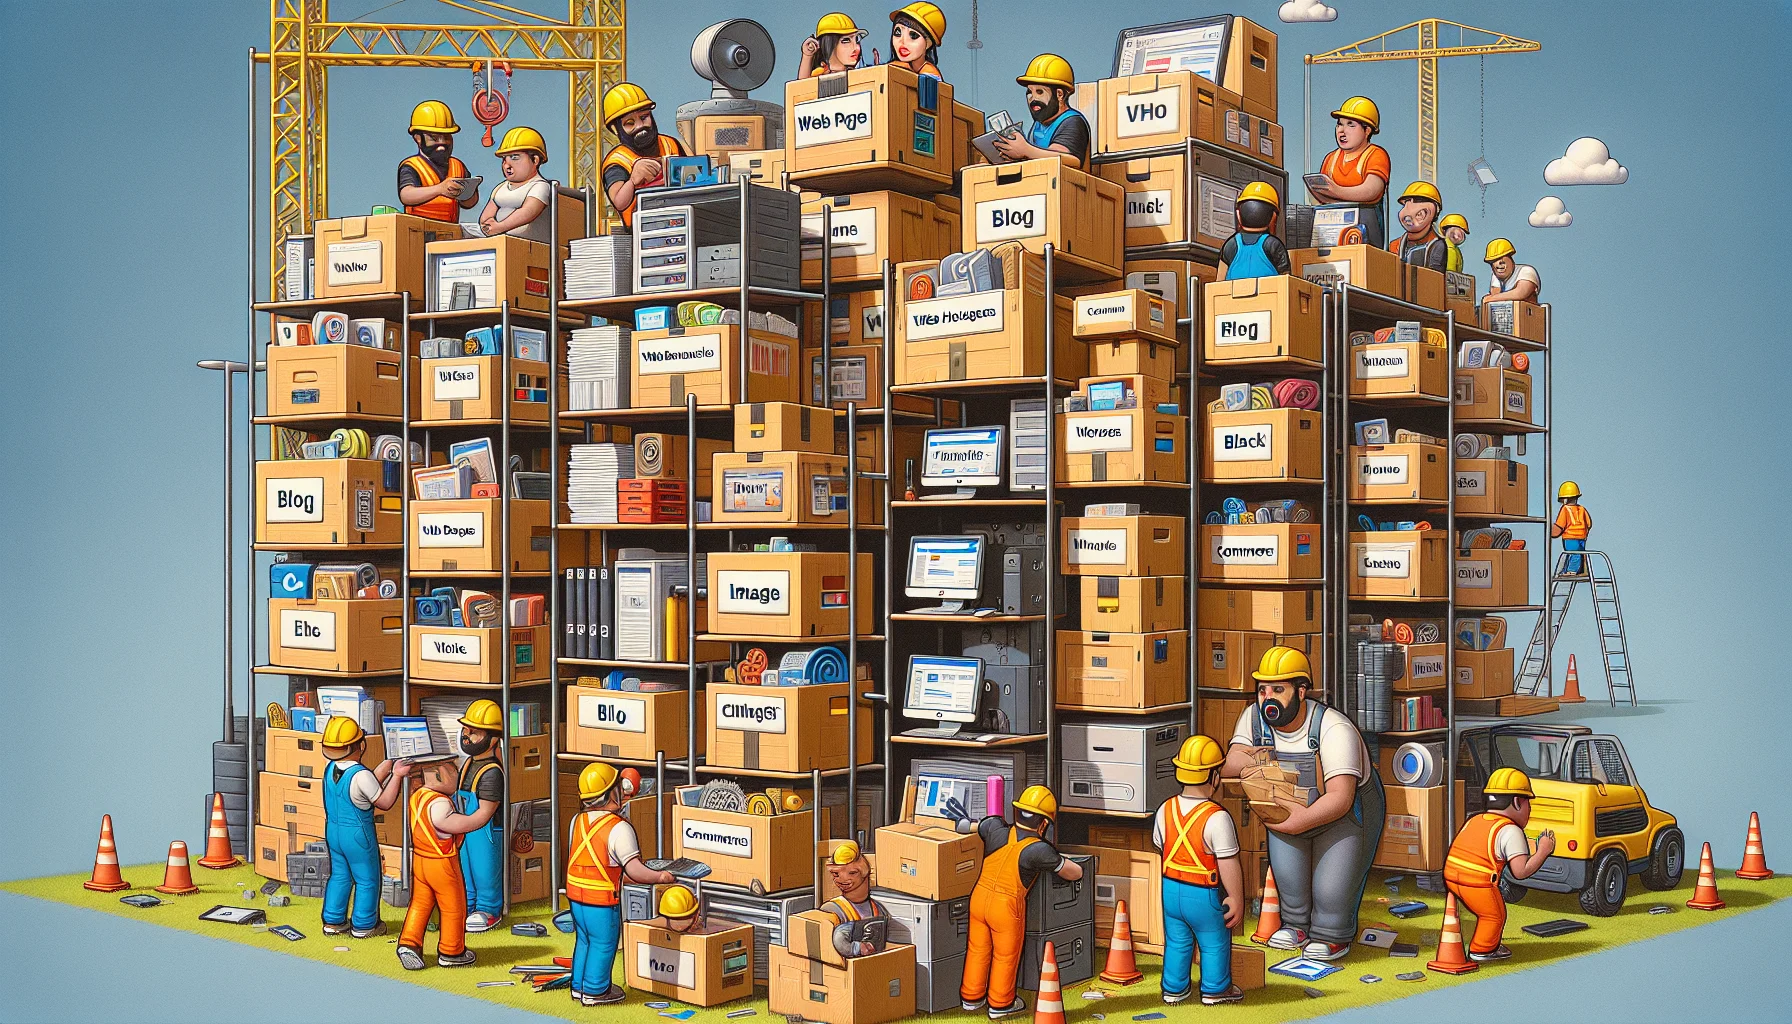 Show a humorous scene of a web hosting situation depicted through a metaphor. It features various virtual boxes labelled as 'web pages', 'blog', 'e-commerce', and 'images', stacked haphazardly in a virtual storage unit. The scene is bustling with digital construction worker characters of diverse racial backgrounds such as Caucasian, South Asian, Black, Middle-Eastern, and Hispanic, both male and female. They are trying to organize and fit the boxes in an overly crowded storage unit. The tone of the image should be playful, enticing, and slightly chaotic.